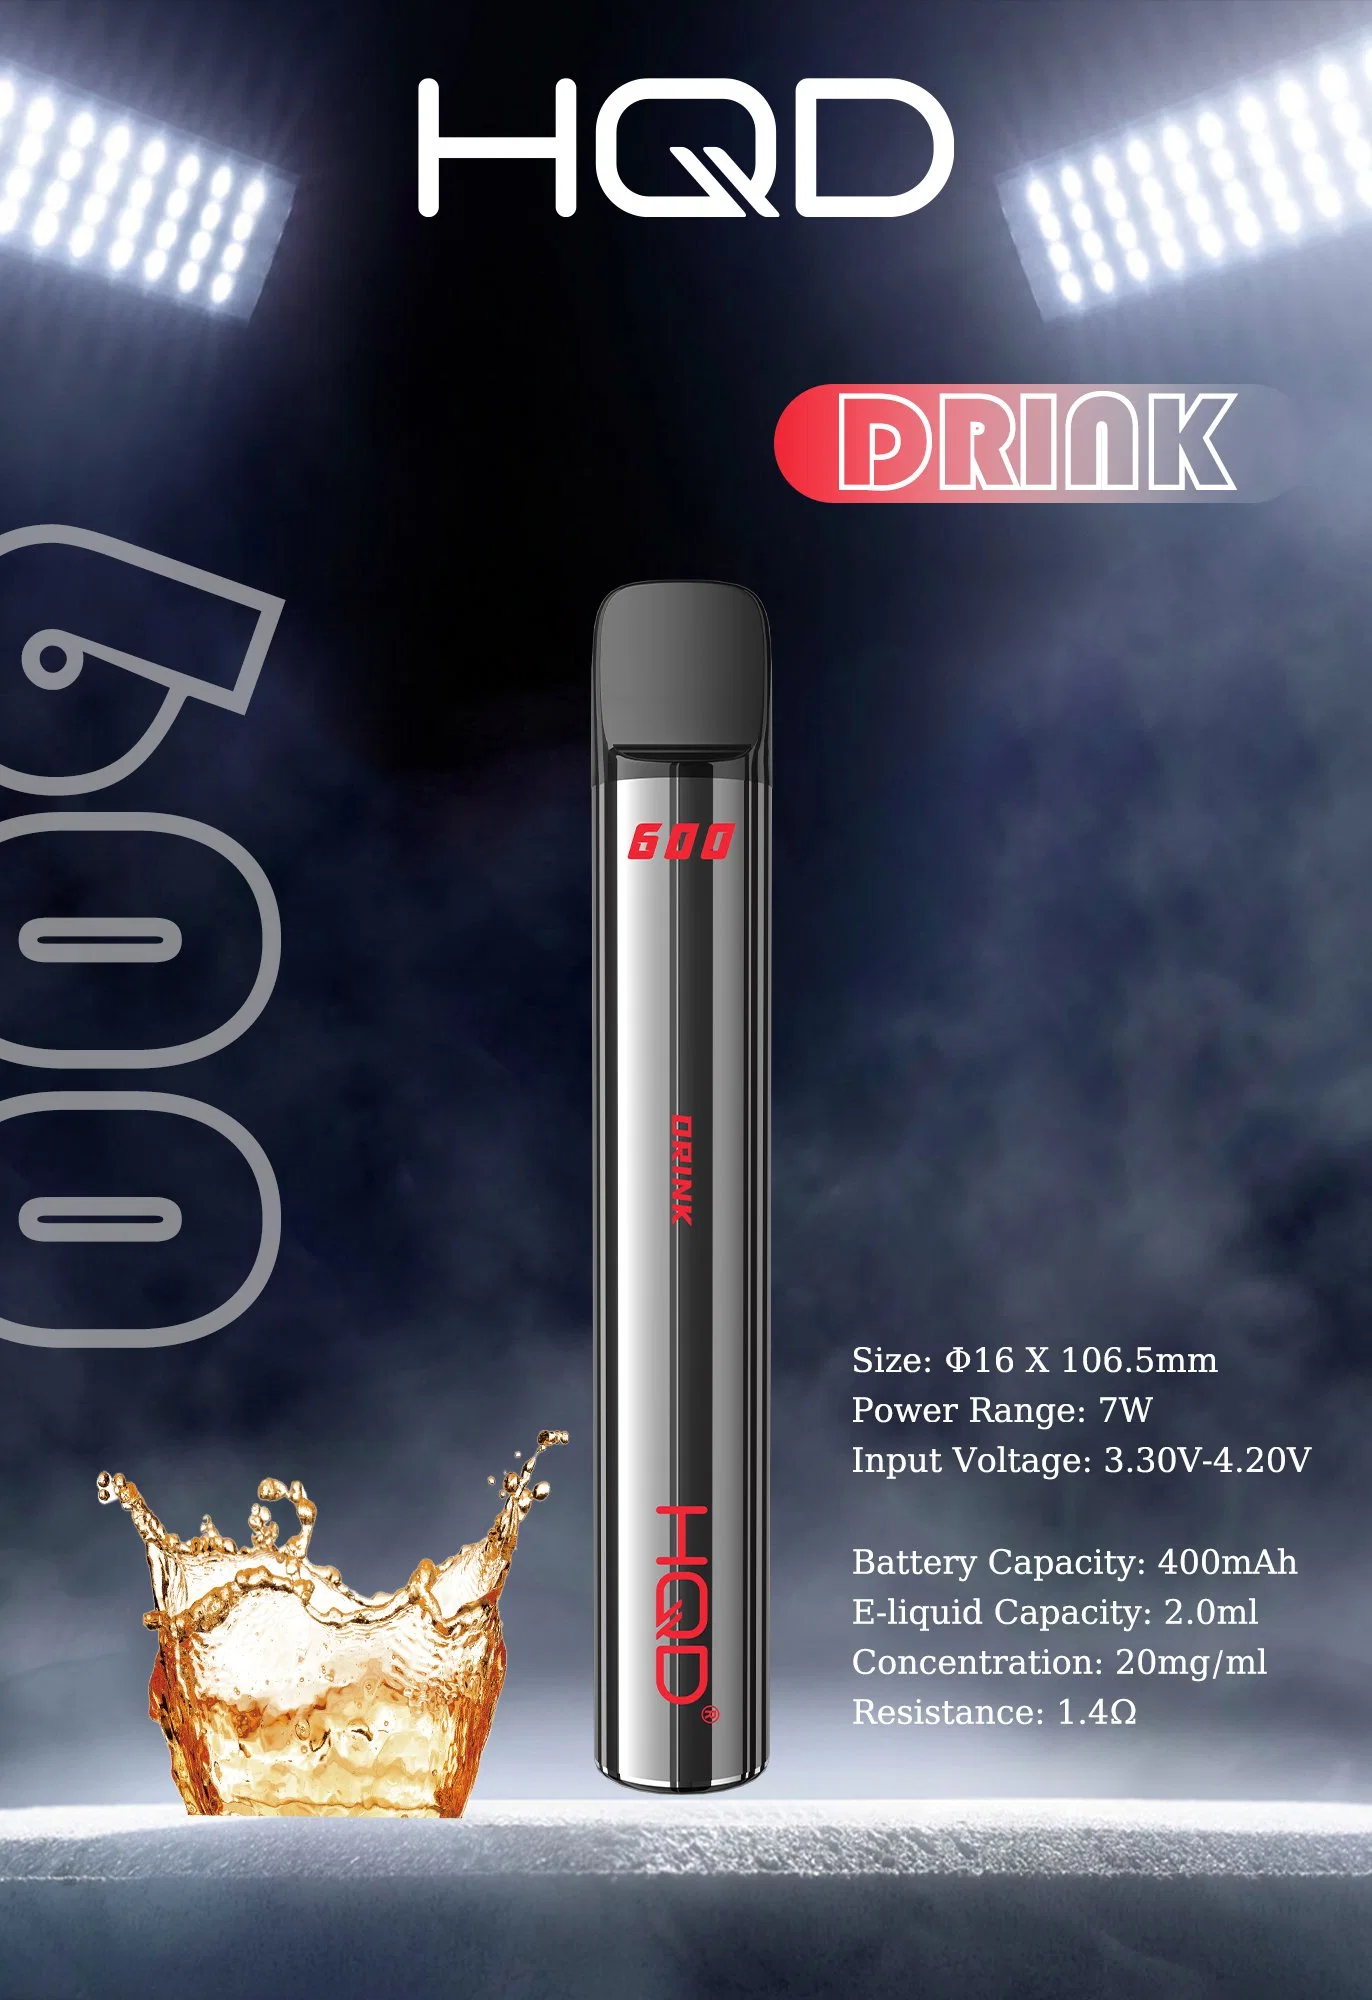 2023 New Arrival Hqd 600puffs Vape Disposable From Hqd in 1688 Alibaba OEM/ODM Available